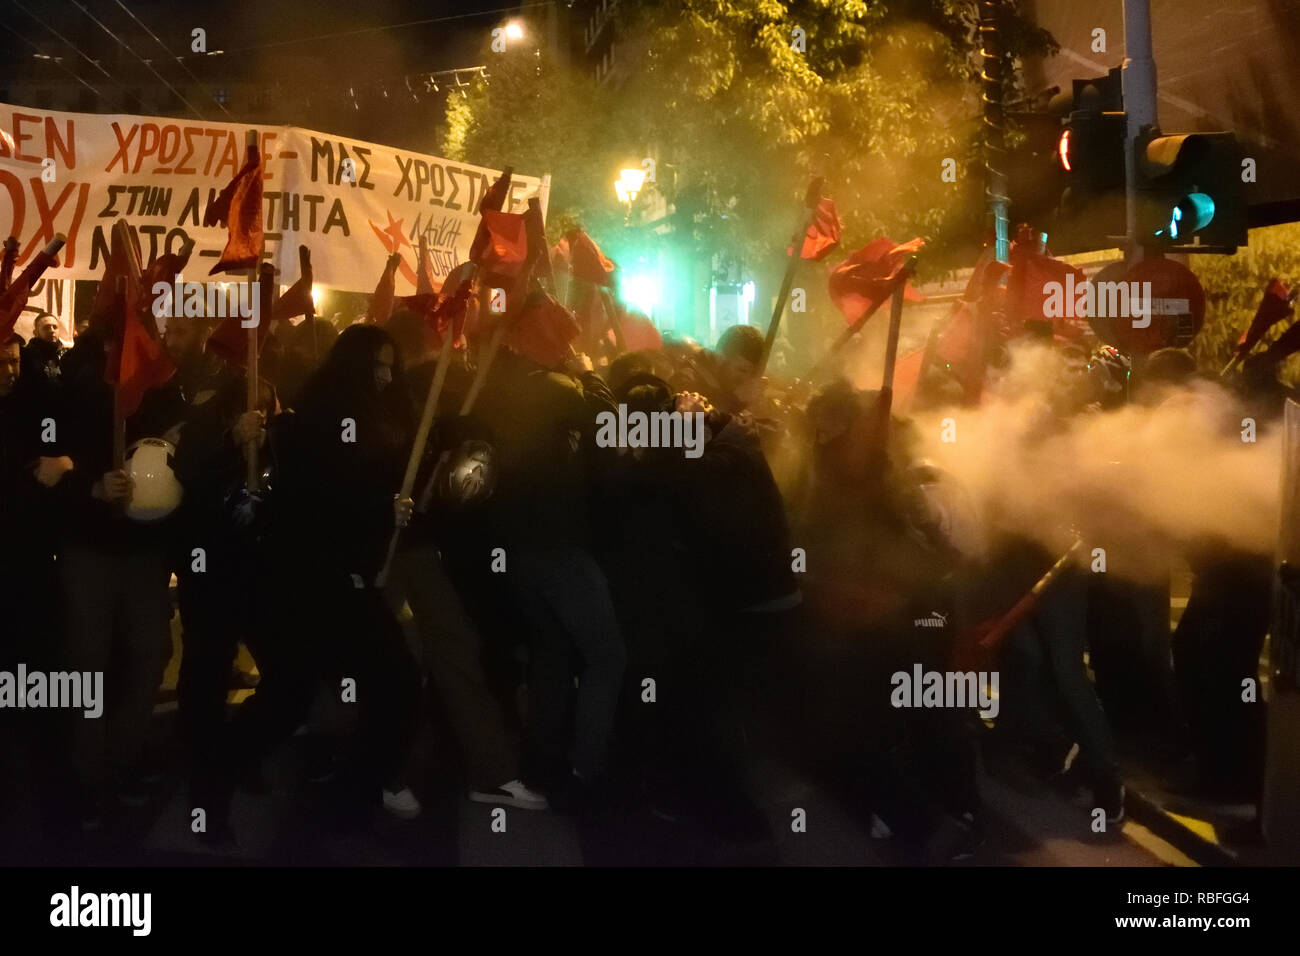 Athens, Greece. 10th Jan 2019. Protesters clash with riot police during the visit of the German Chancellor Angela Merkel in Athens, Greece. Credit: Nicolas Koutsokostas/Alamy Live News. Stock Photo